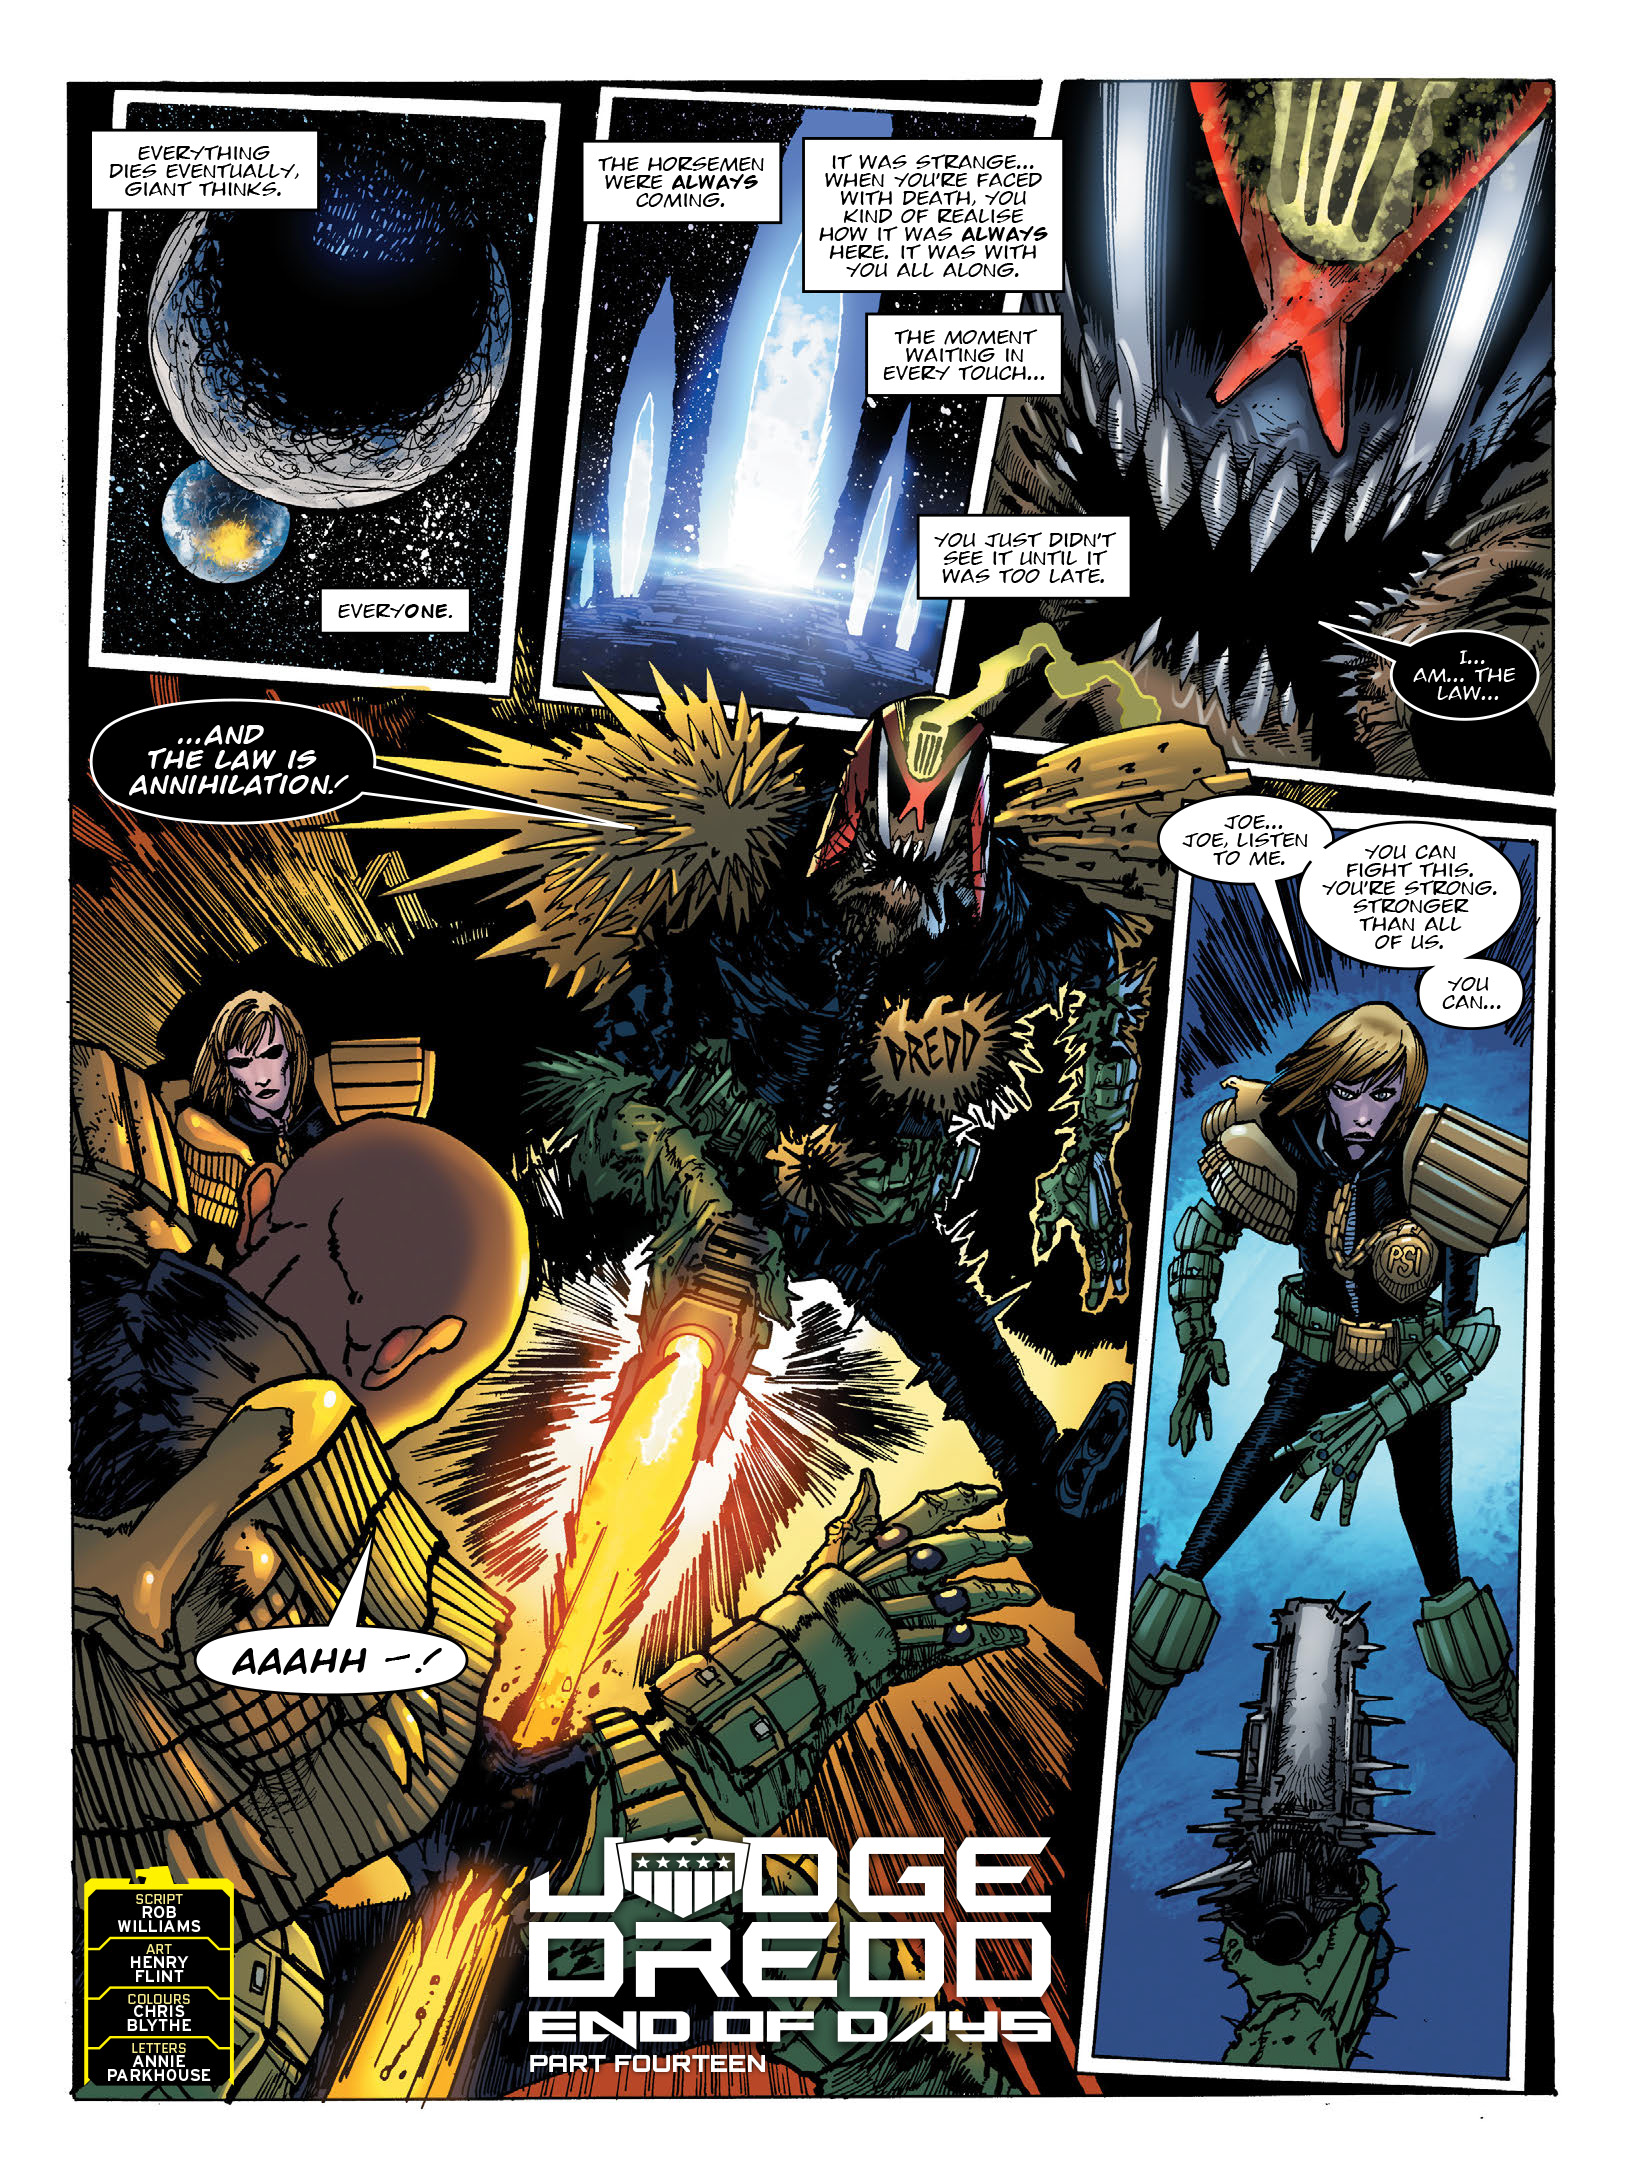 2000 AD: Chapter 2198 - Page 3